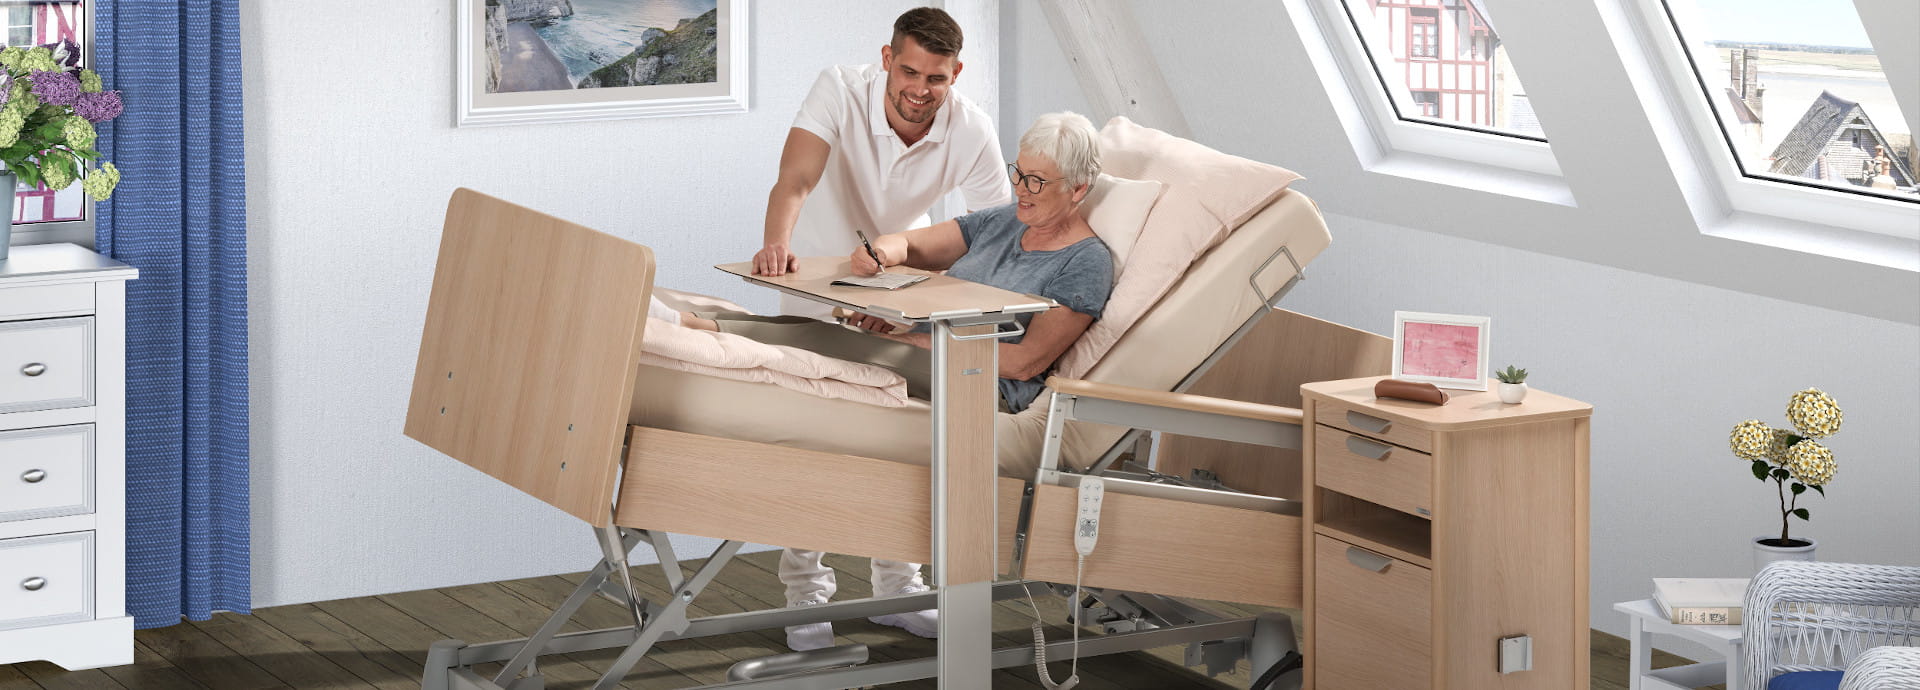 The carisma sc low nursing bed supports care at the highest level while improving the comfort and quality of life of your residents.